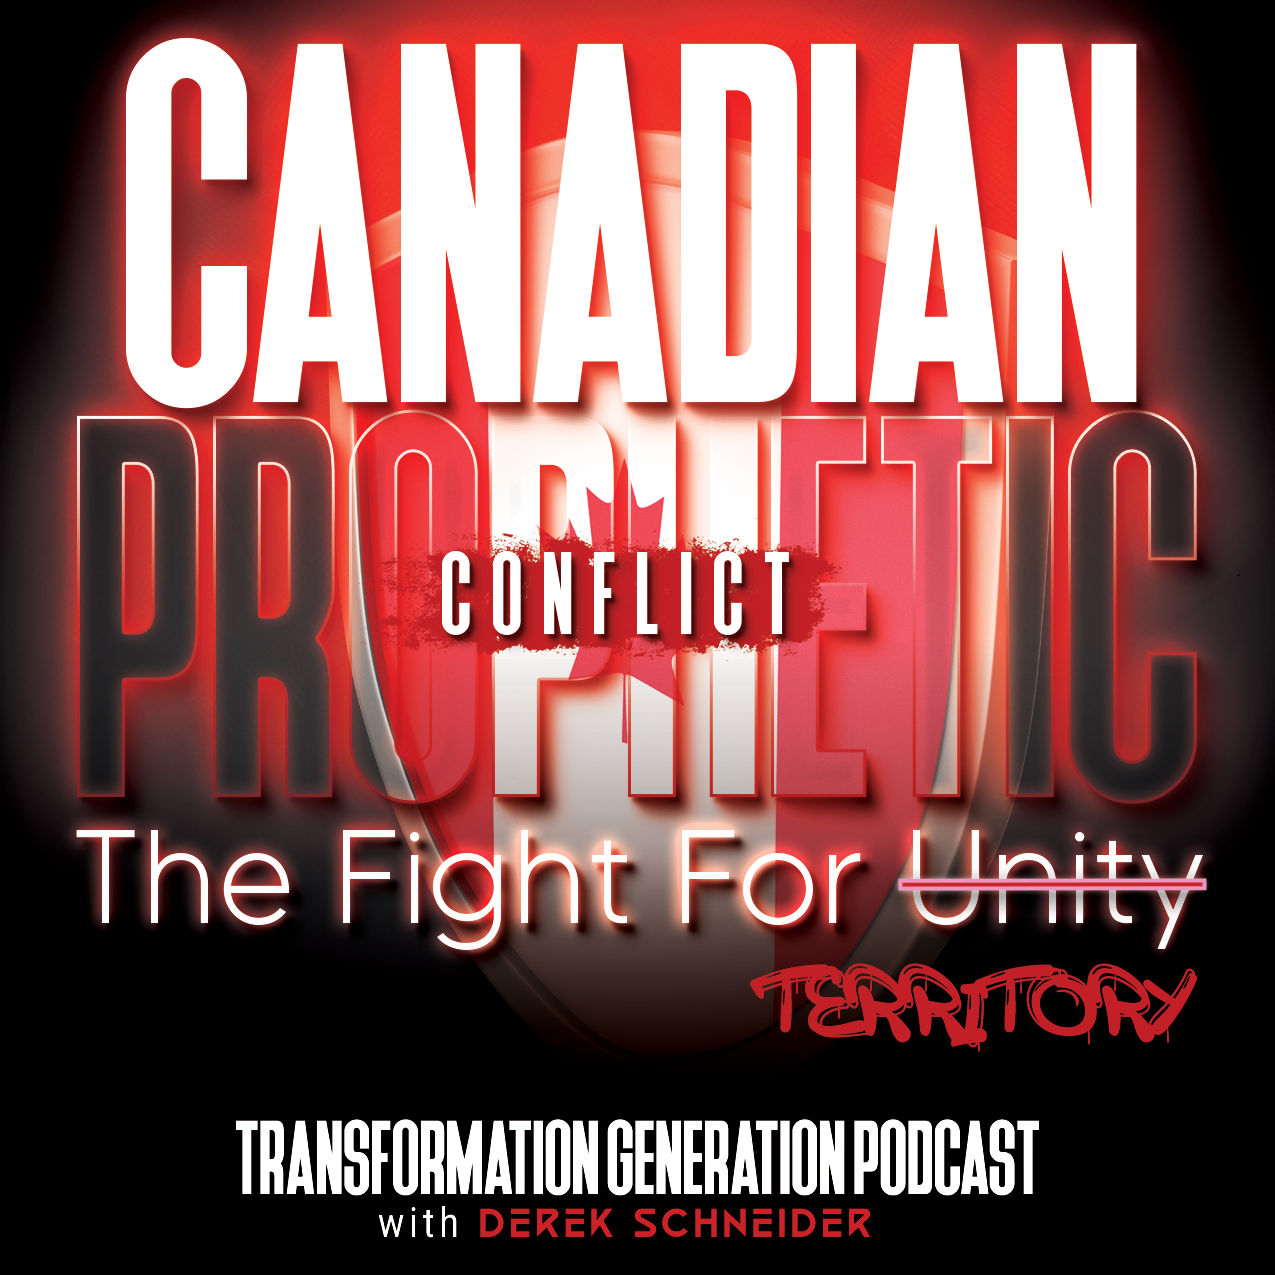 Canadian Prophetic Conflict: The Fight for Unity Territory